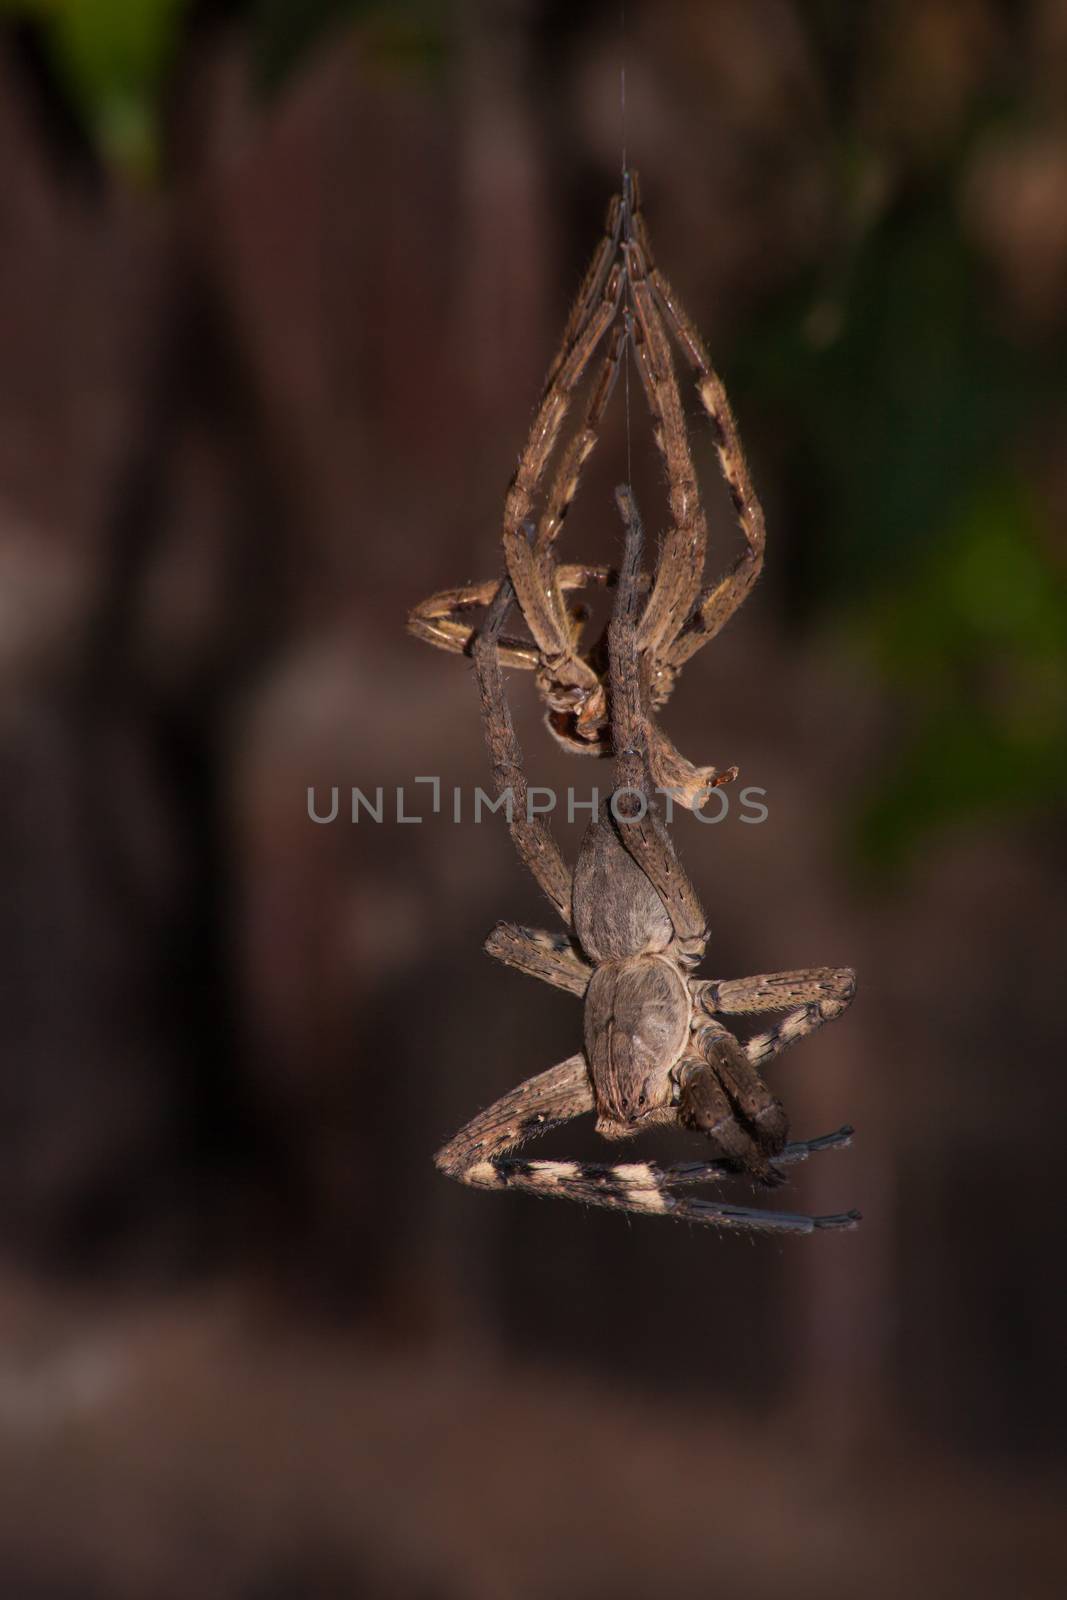 Moulting Spider 6017 by kobus_peche